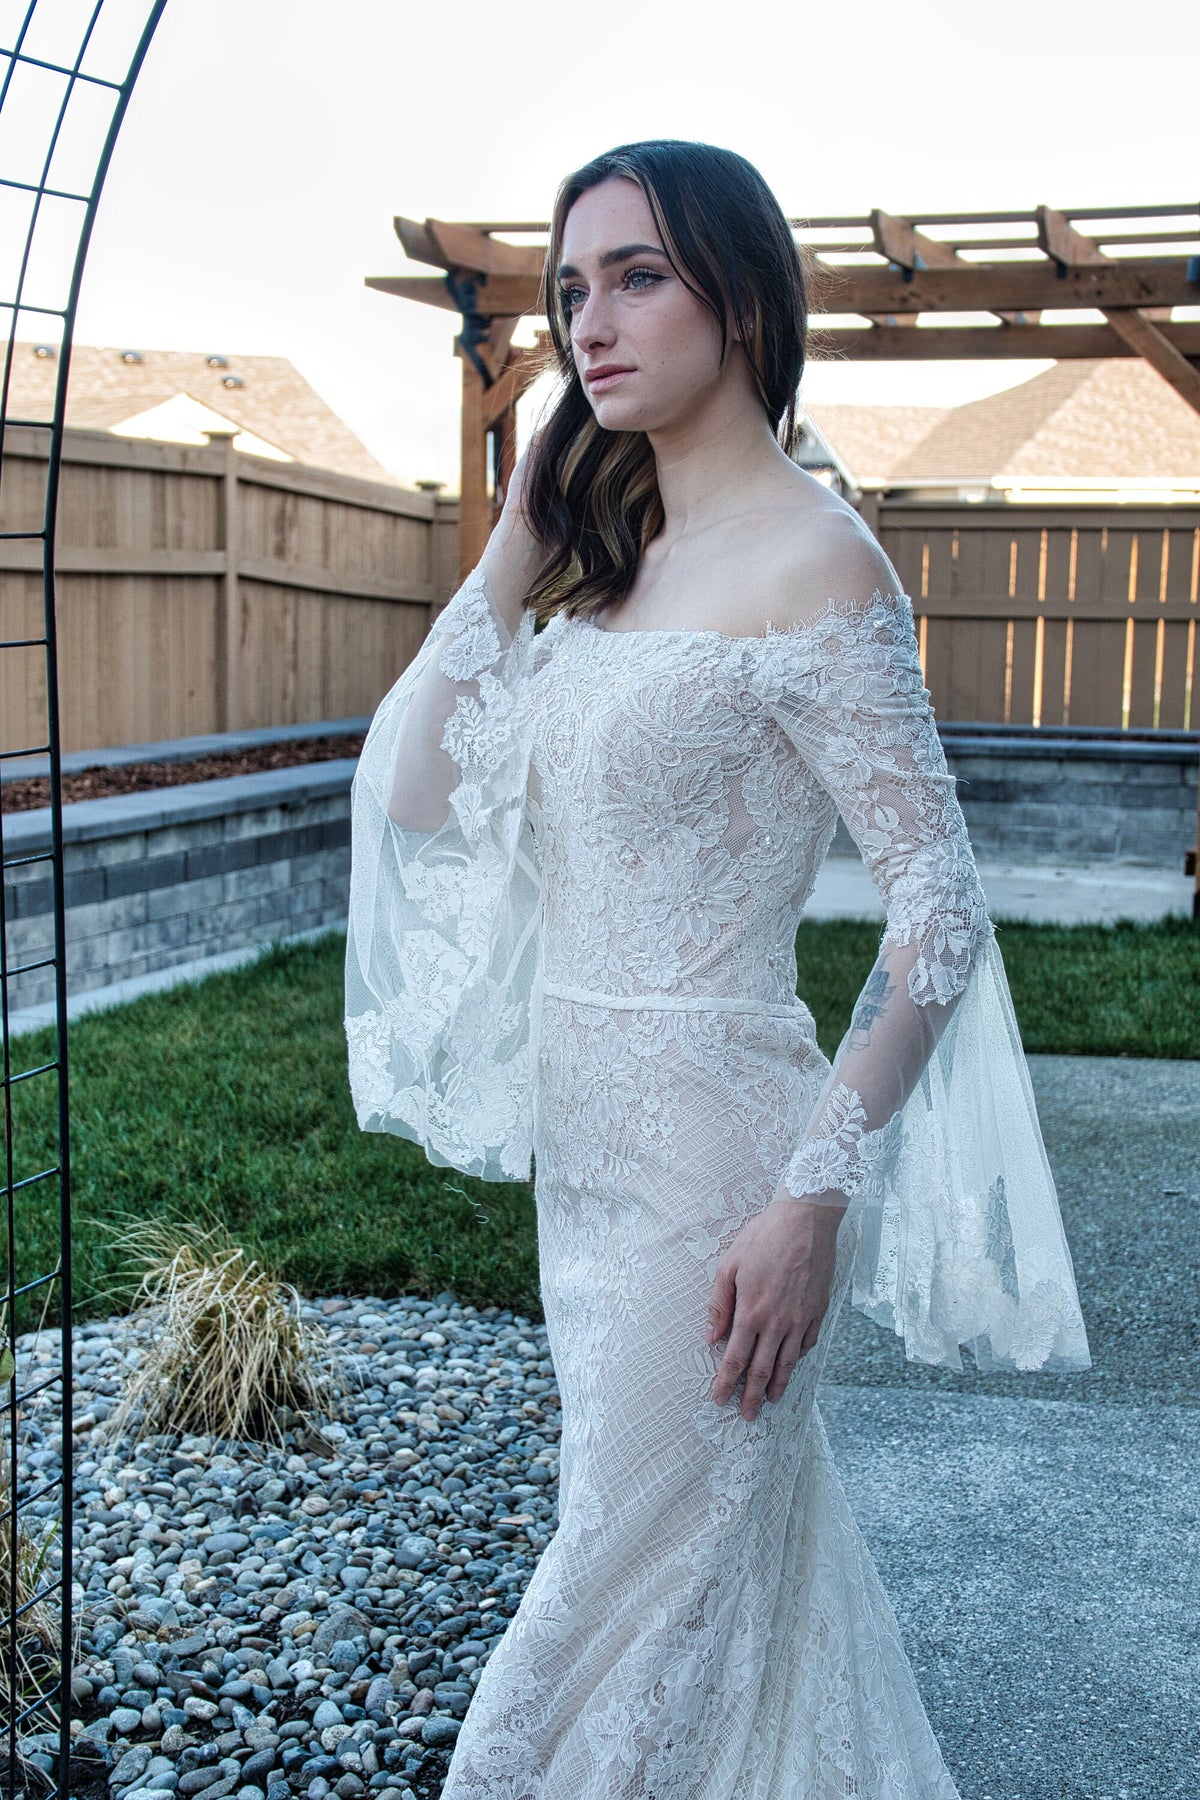 Beautiful Lace Off the Shoulder Long Sleeve Straight Neckline Mermaid Fit and Flare Wedding Dress Bridal Gown All Over Lace Vintage Style